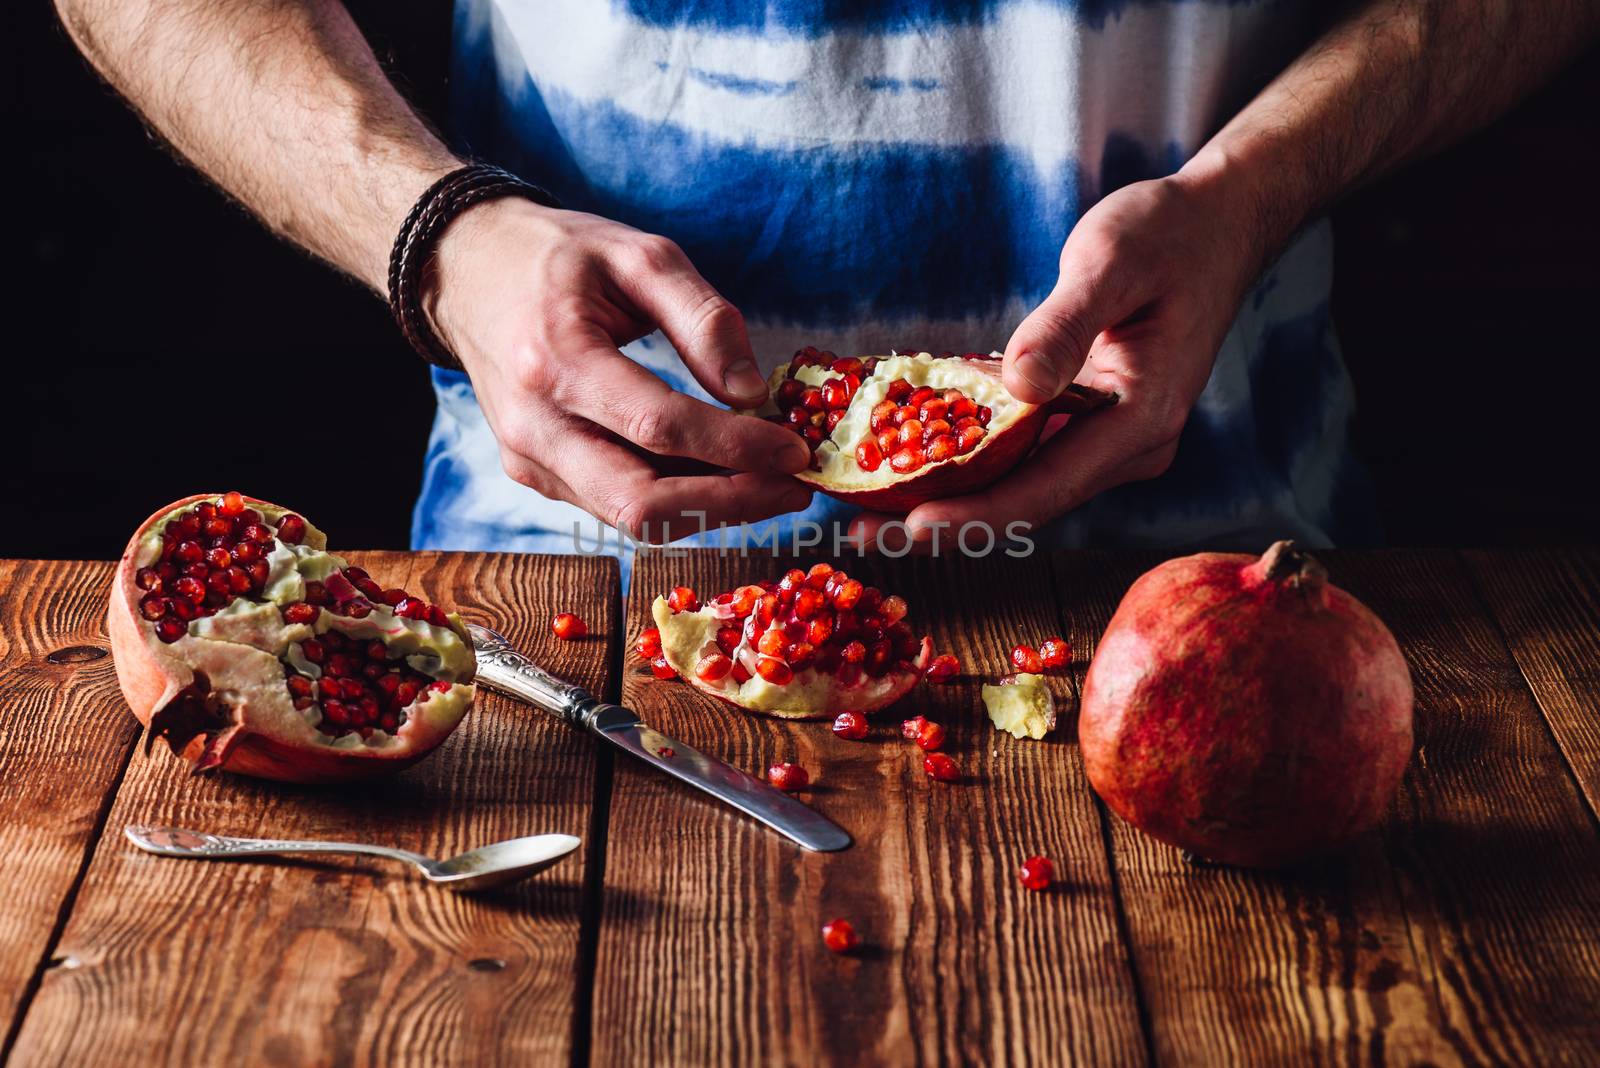 Opened Pomegranate Fruit in Hands and Other Pieces with Knife and Spoon on the Table